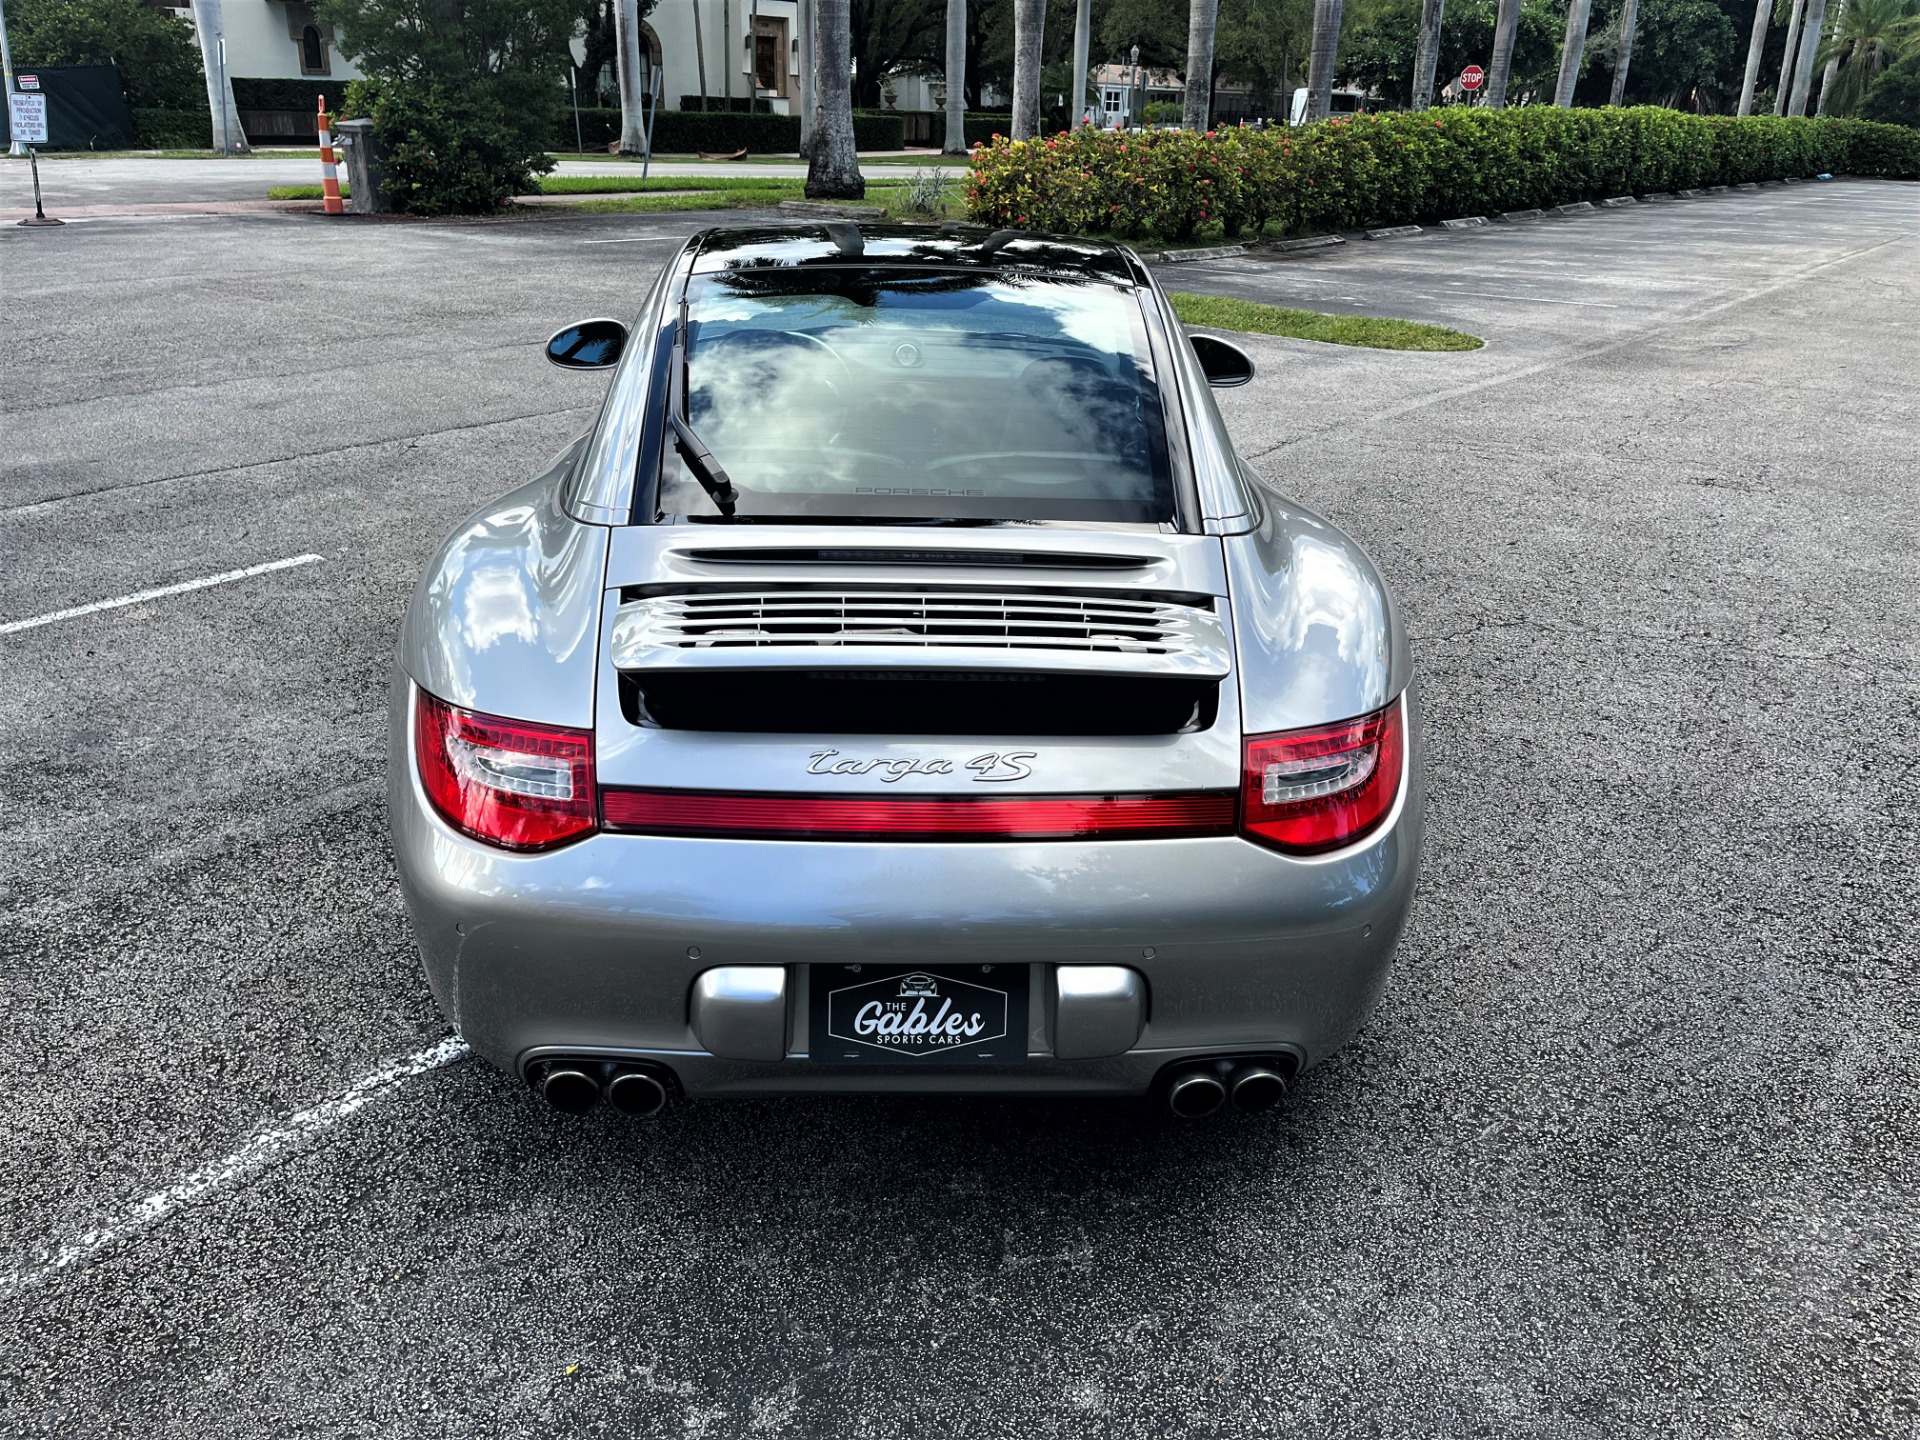 Used 2011 Porsche 911 Targa 4S for sale $88,850 at The Gables Sports Cars in Miami FL 33146 3